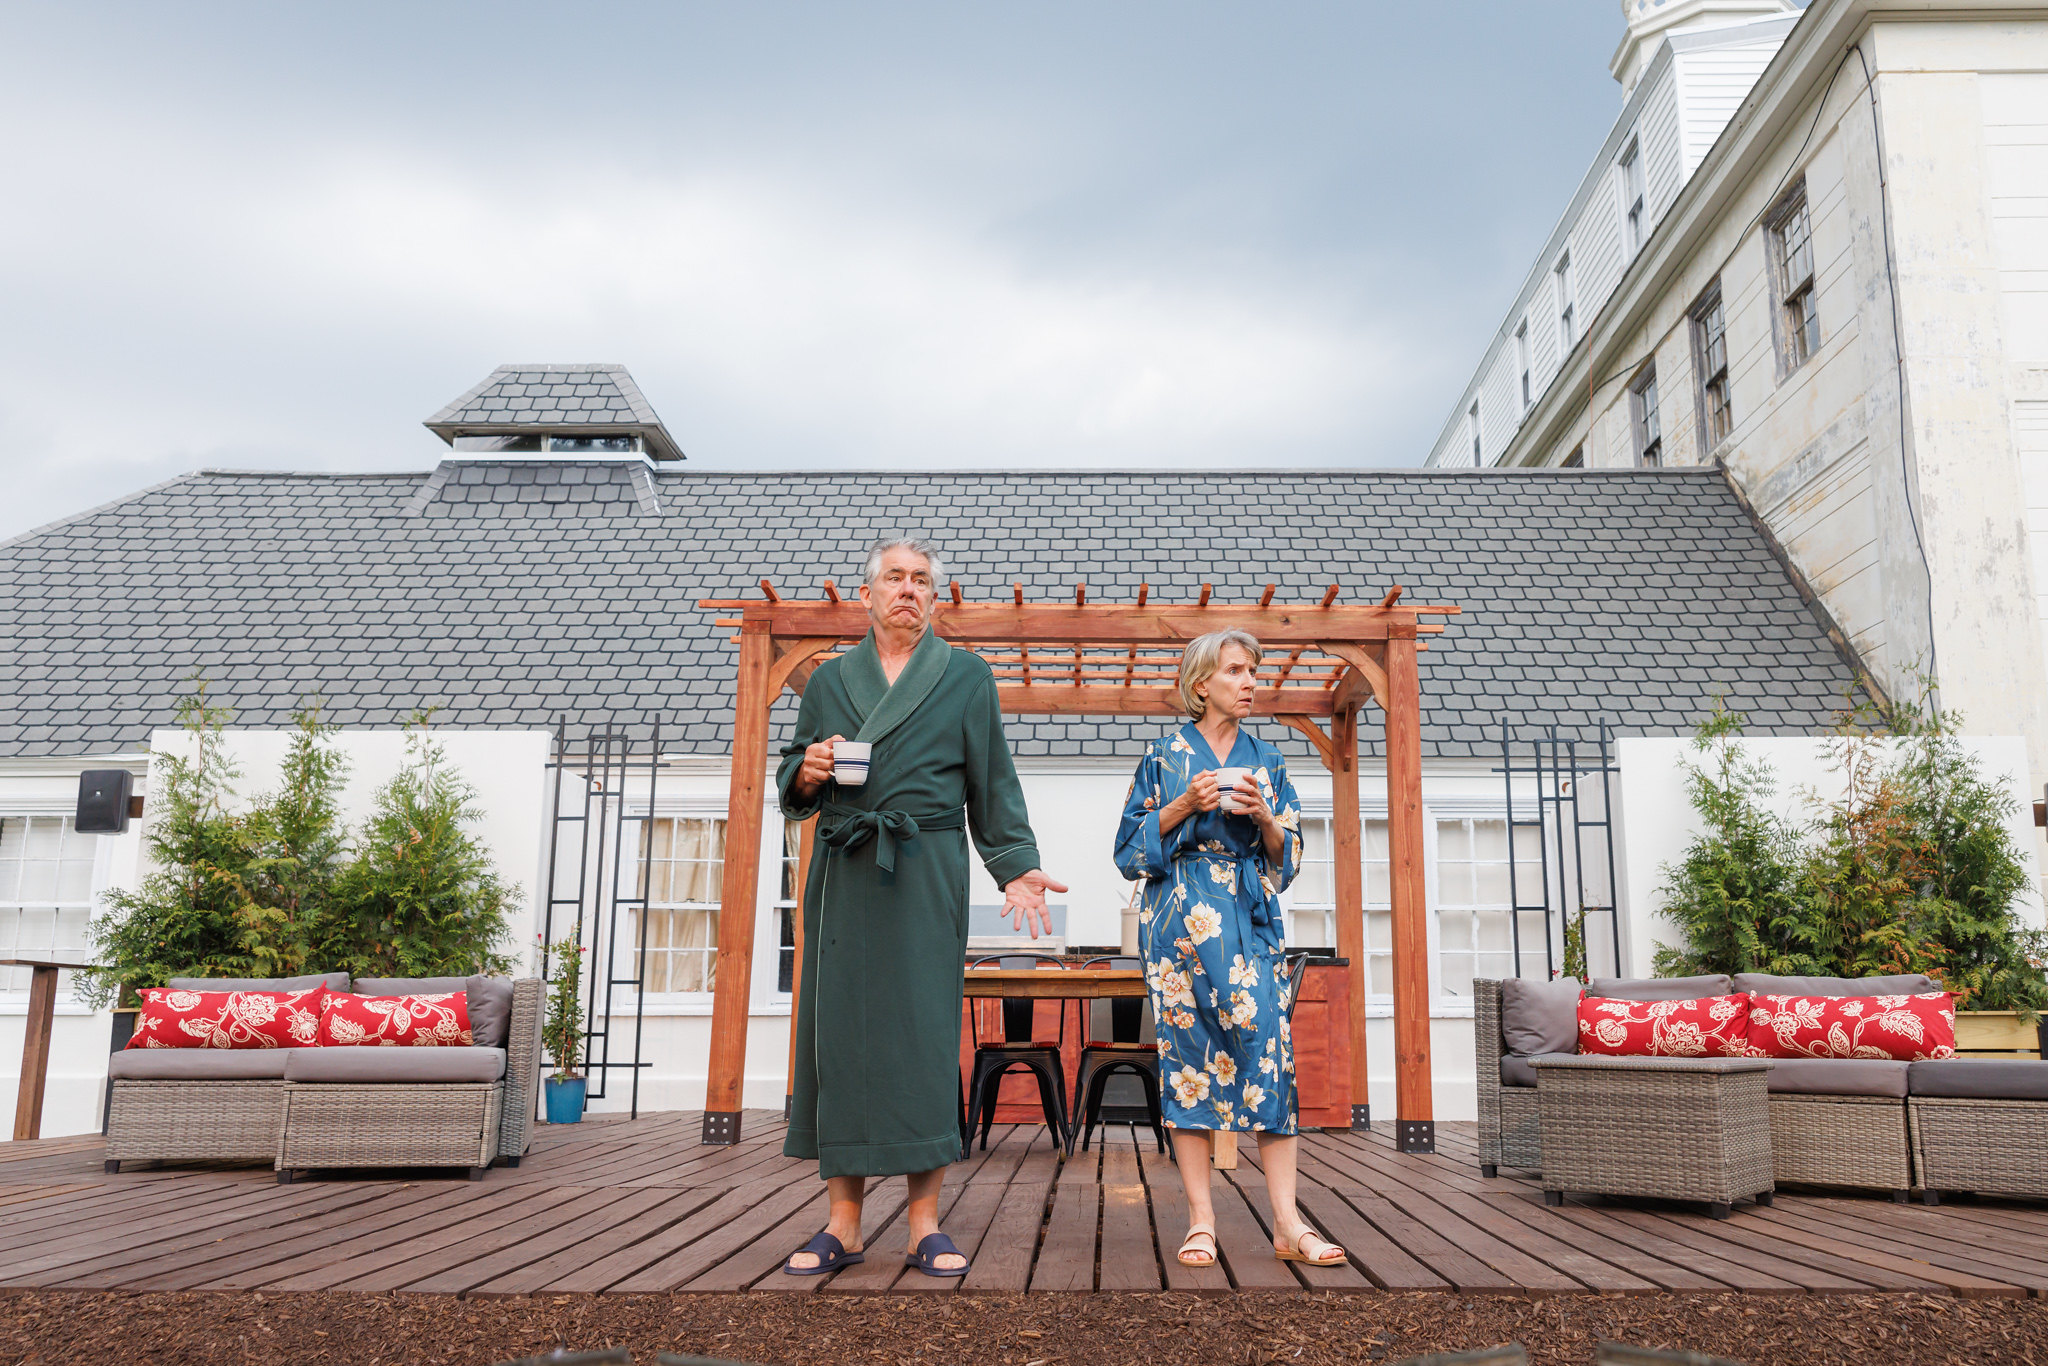 Kevin O'Rourke and Bella Merlin, who portray Moss and Avis in Lee Blessing's "A Body of Water," stand on a wooden deck in front of a well-appointed house. O'Rourke is in a green robe and slippers, holding a cup of coffee, and gesturing with one hand, while Merlin, in a blue floral robe and sandals, also holds a coffee cup. They appear contemplative and somewhat confused, fitting the theme of the play. The background shows part of the house with a trellis and outdoor seating area.